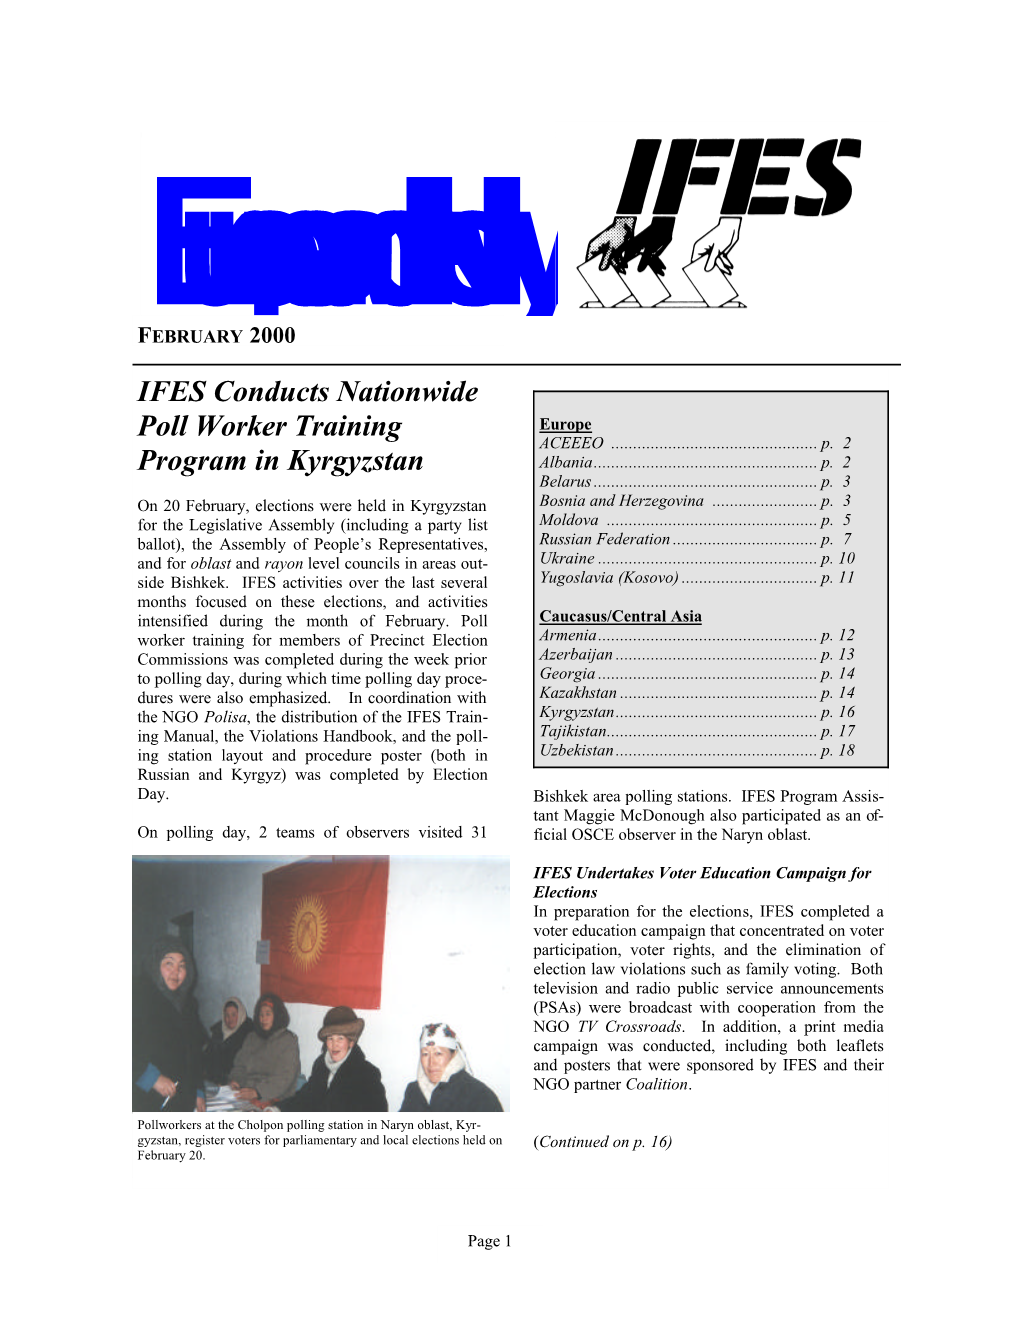 IFES Conducts Nationwide Poll Worker Training Program In